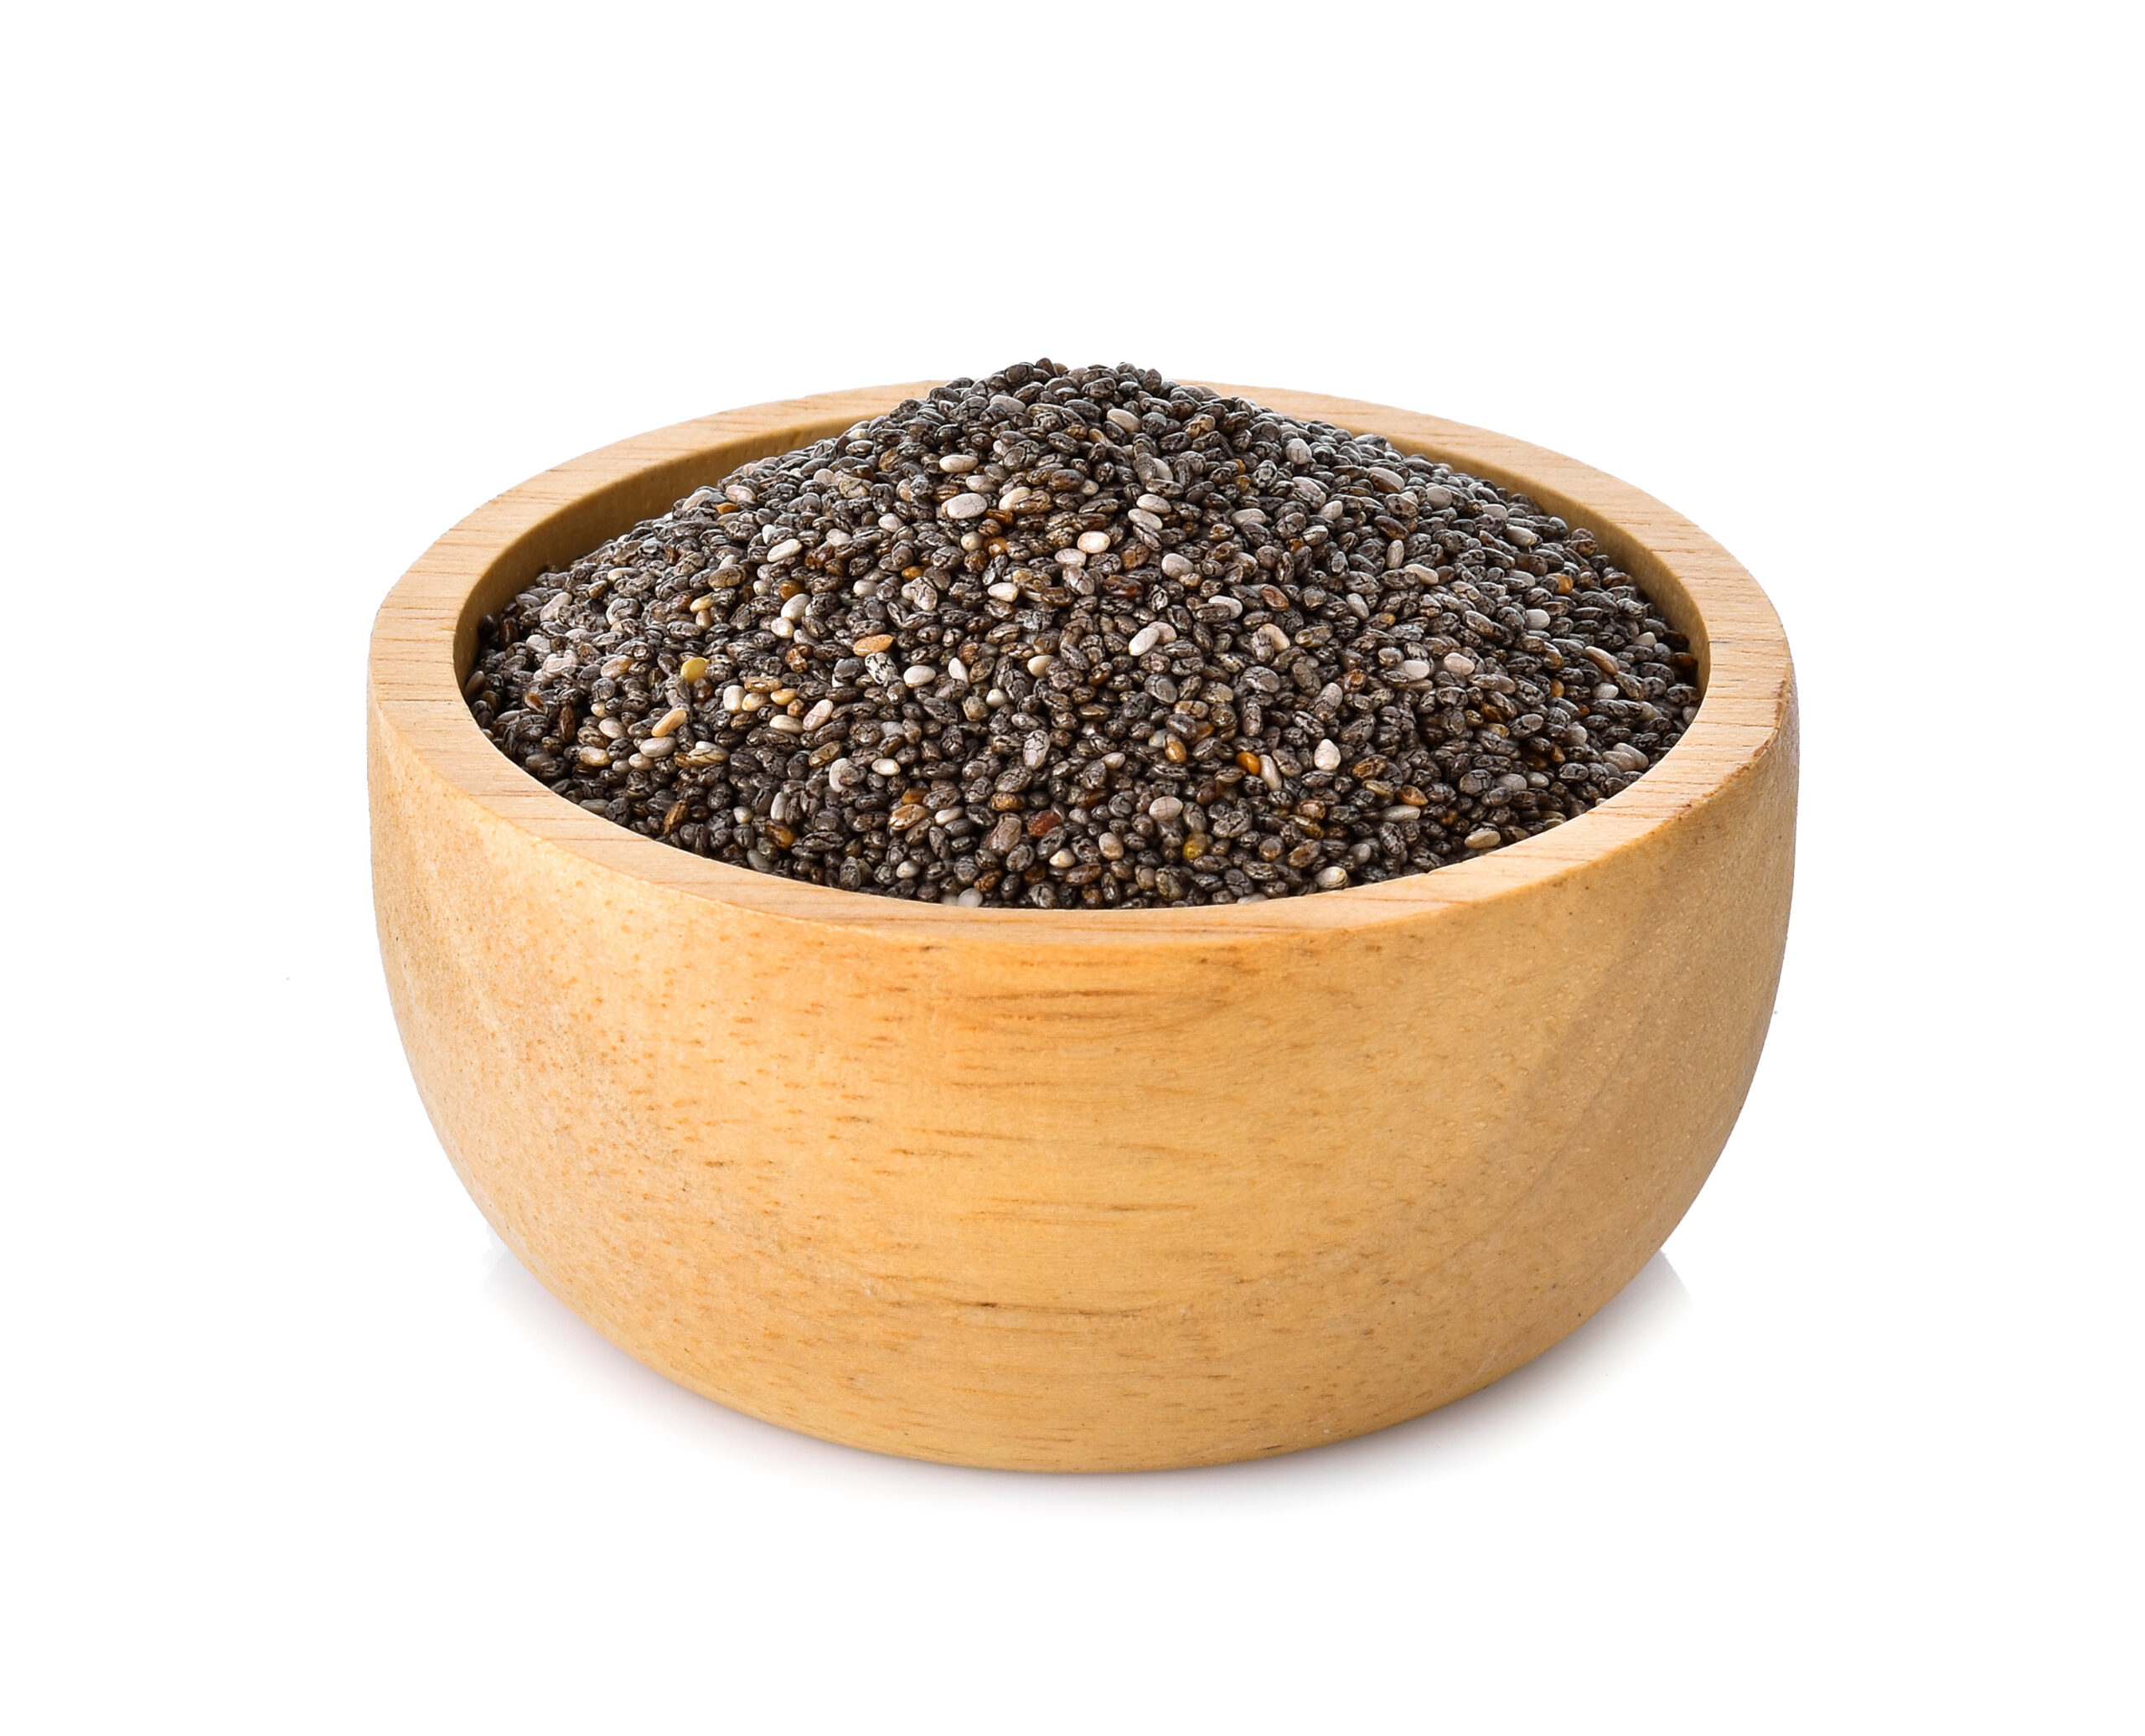 Chia Seeds In Wood Bowl On White Background